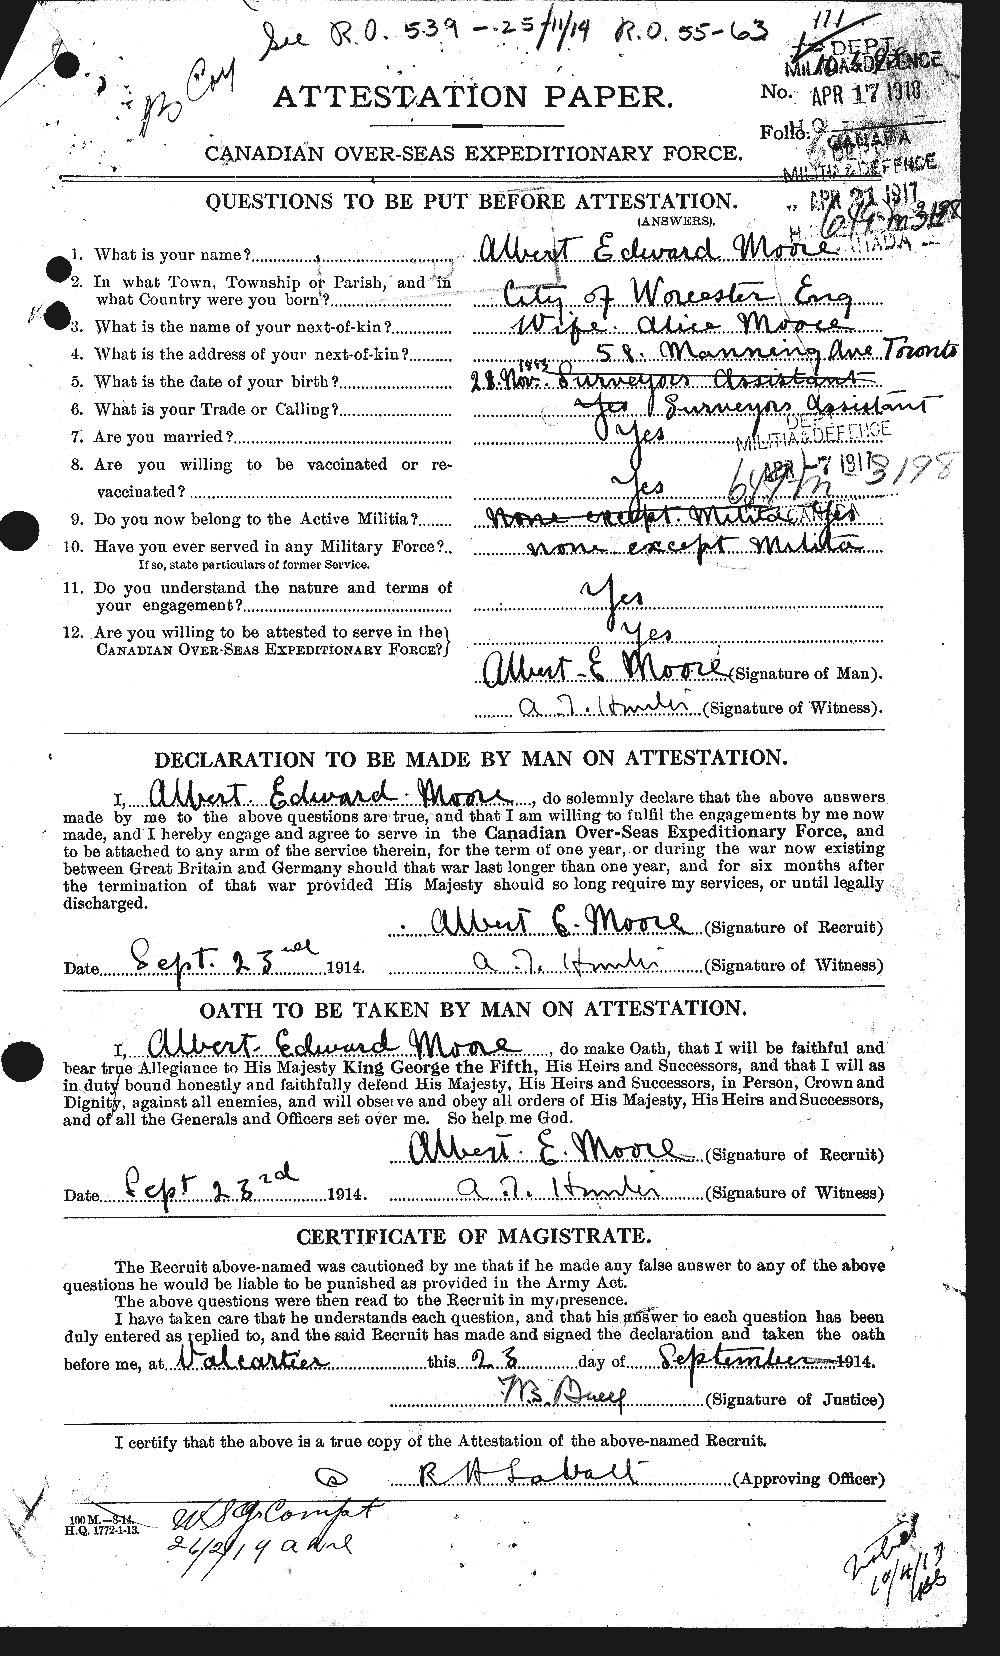 Personnel Records of the First World War - CEF 506341a